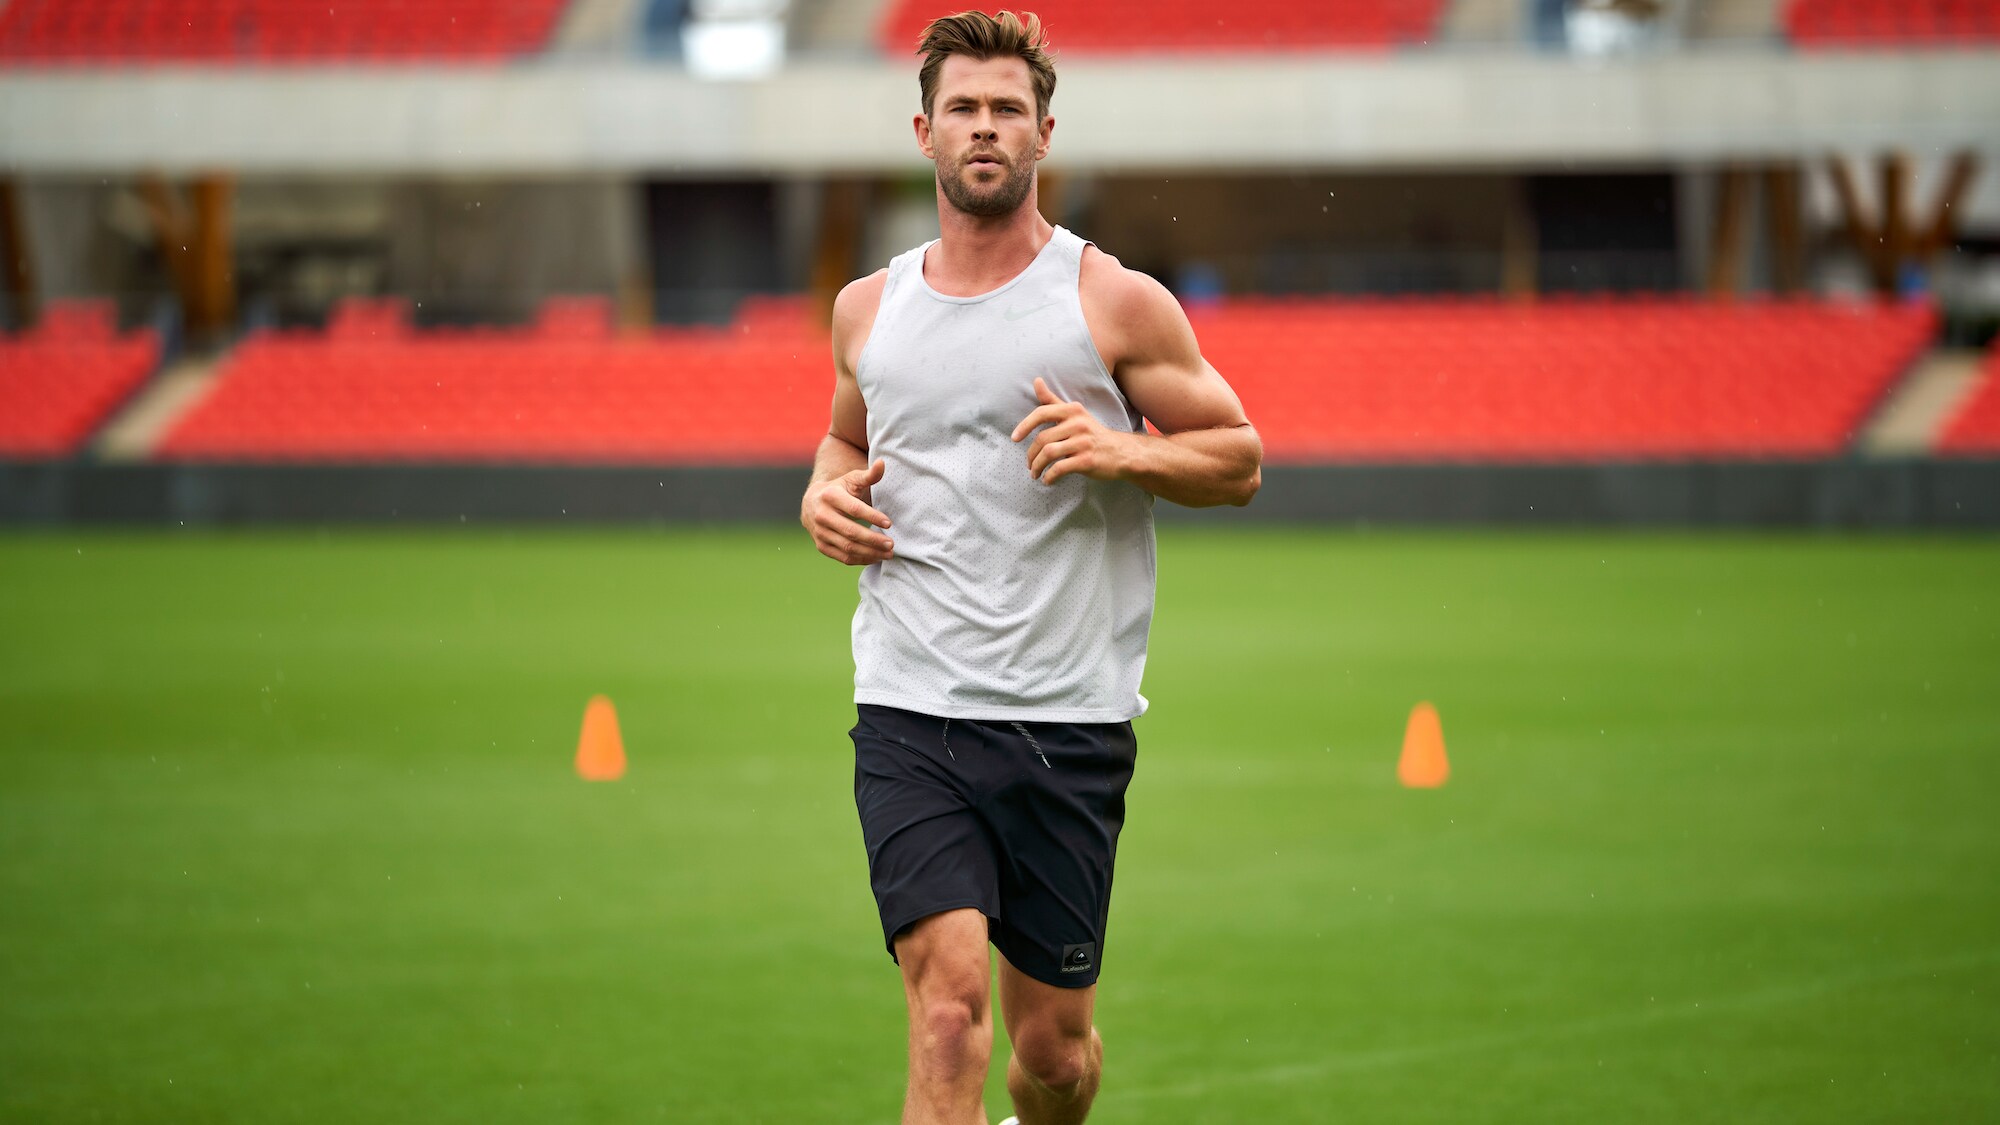 Chris Hemsworth runs on a field. (National Geographic for Disney+/Craig Parry)